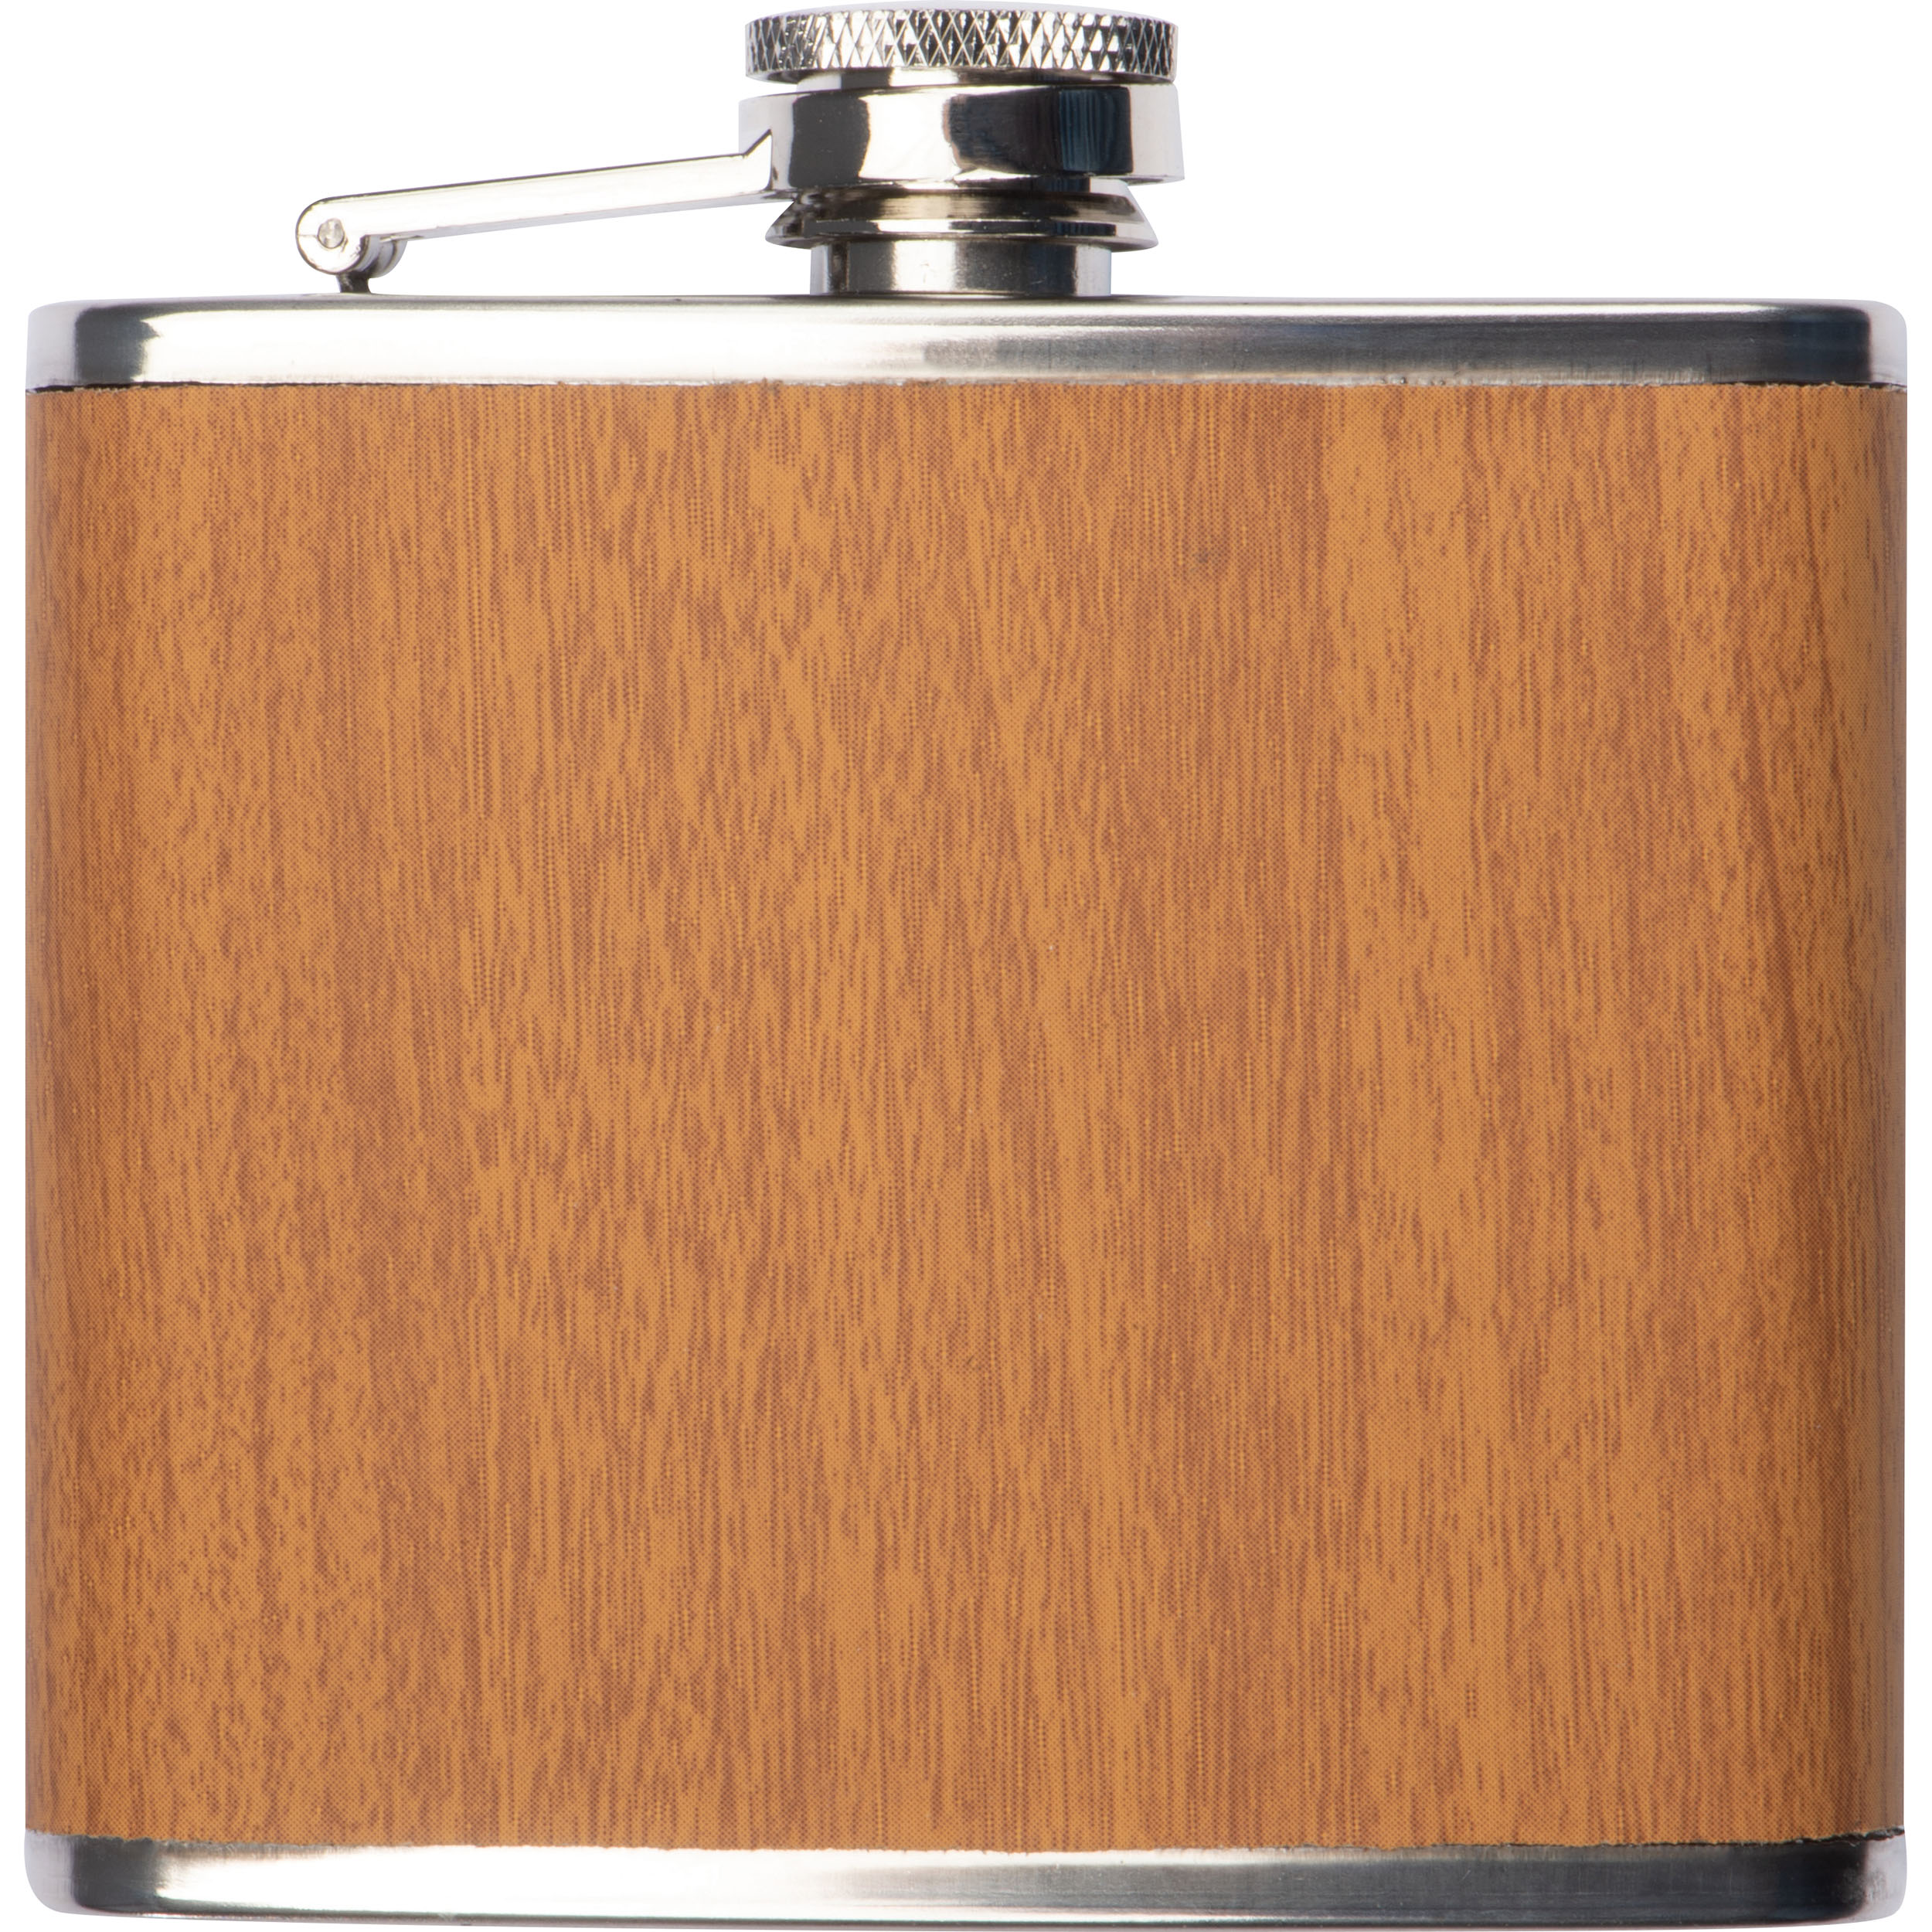 Stainless Steel Hip Flask with wooden Coating